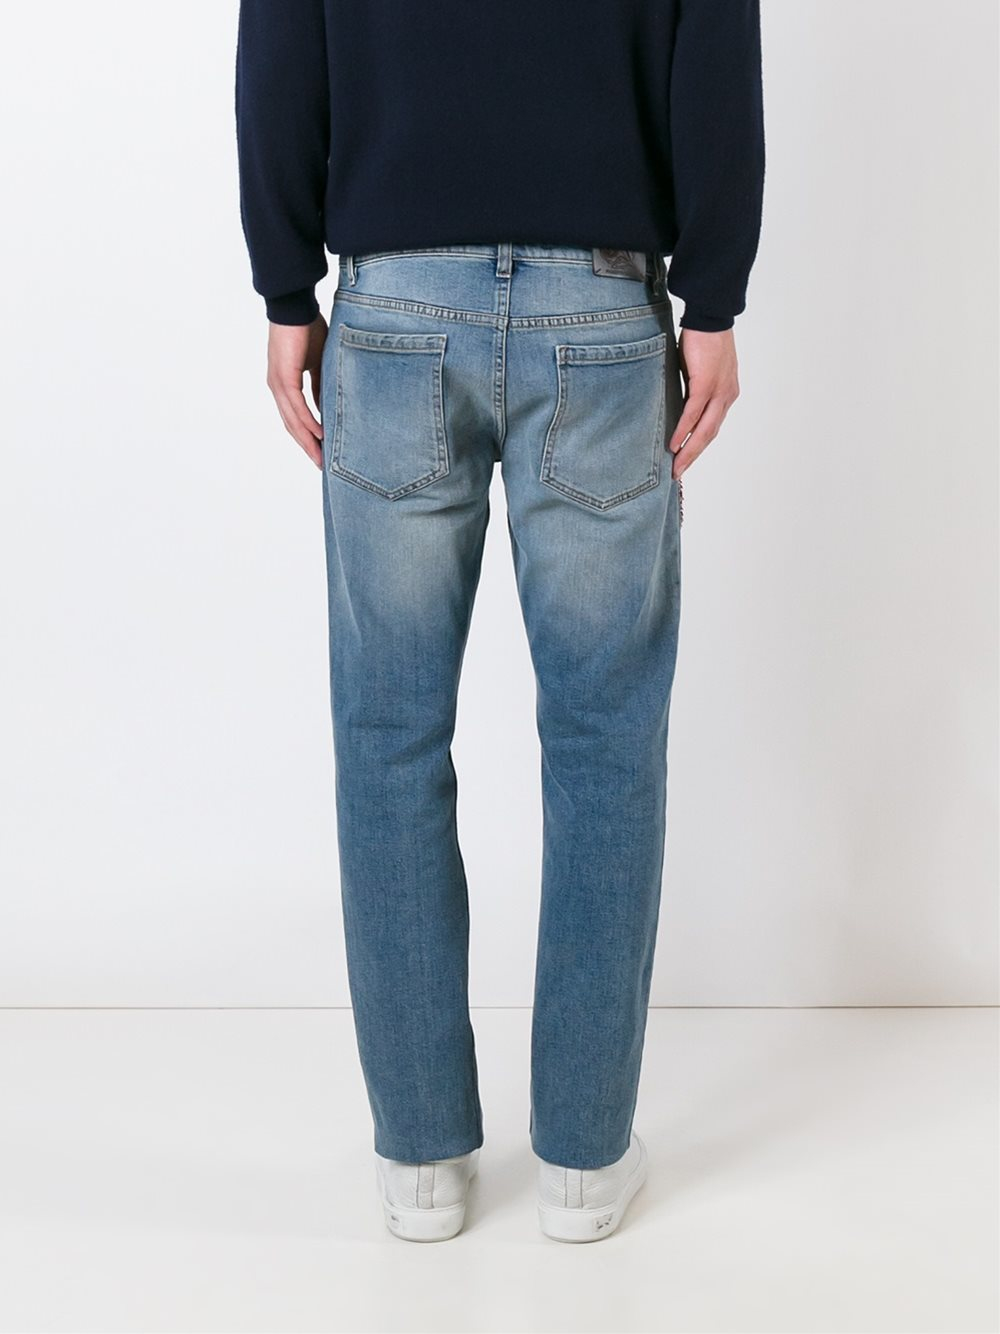 Lyst - Roberto cavalli Embroidered Slim Fit Jeans in Blue for Men